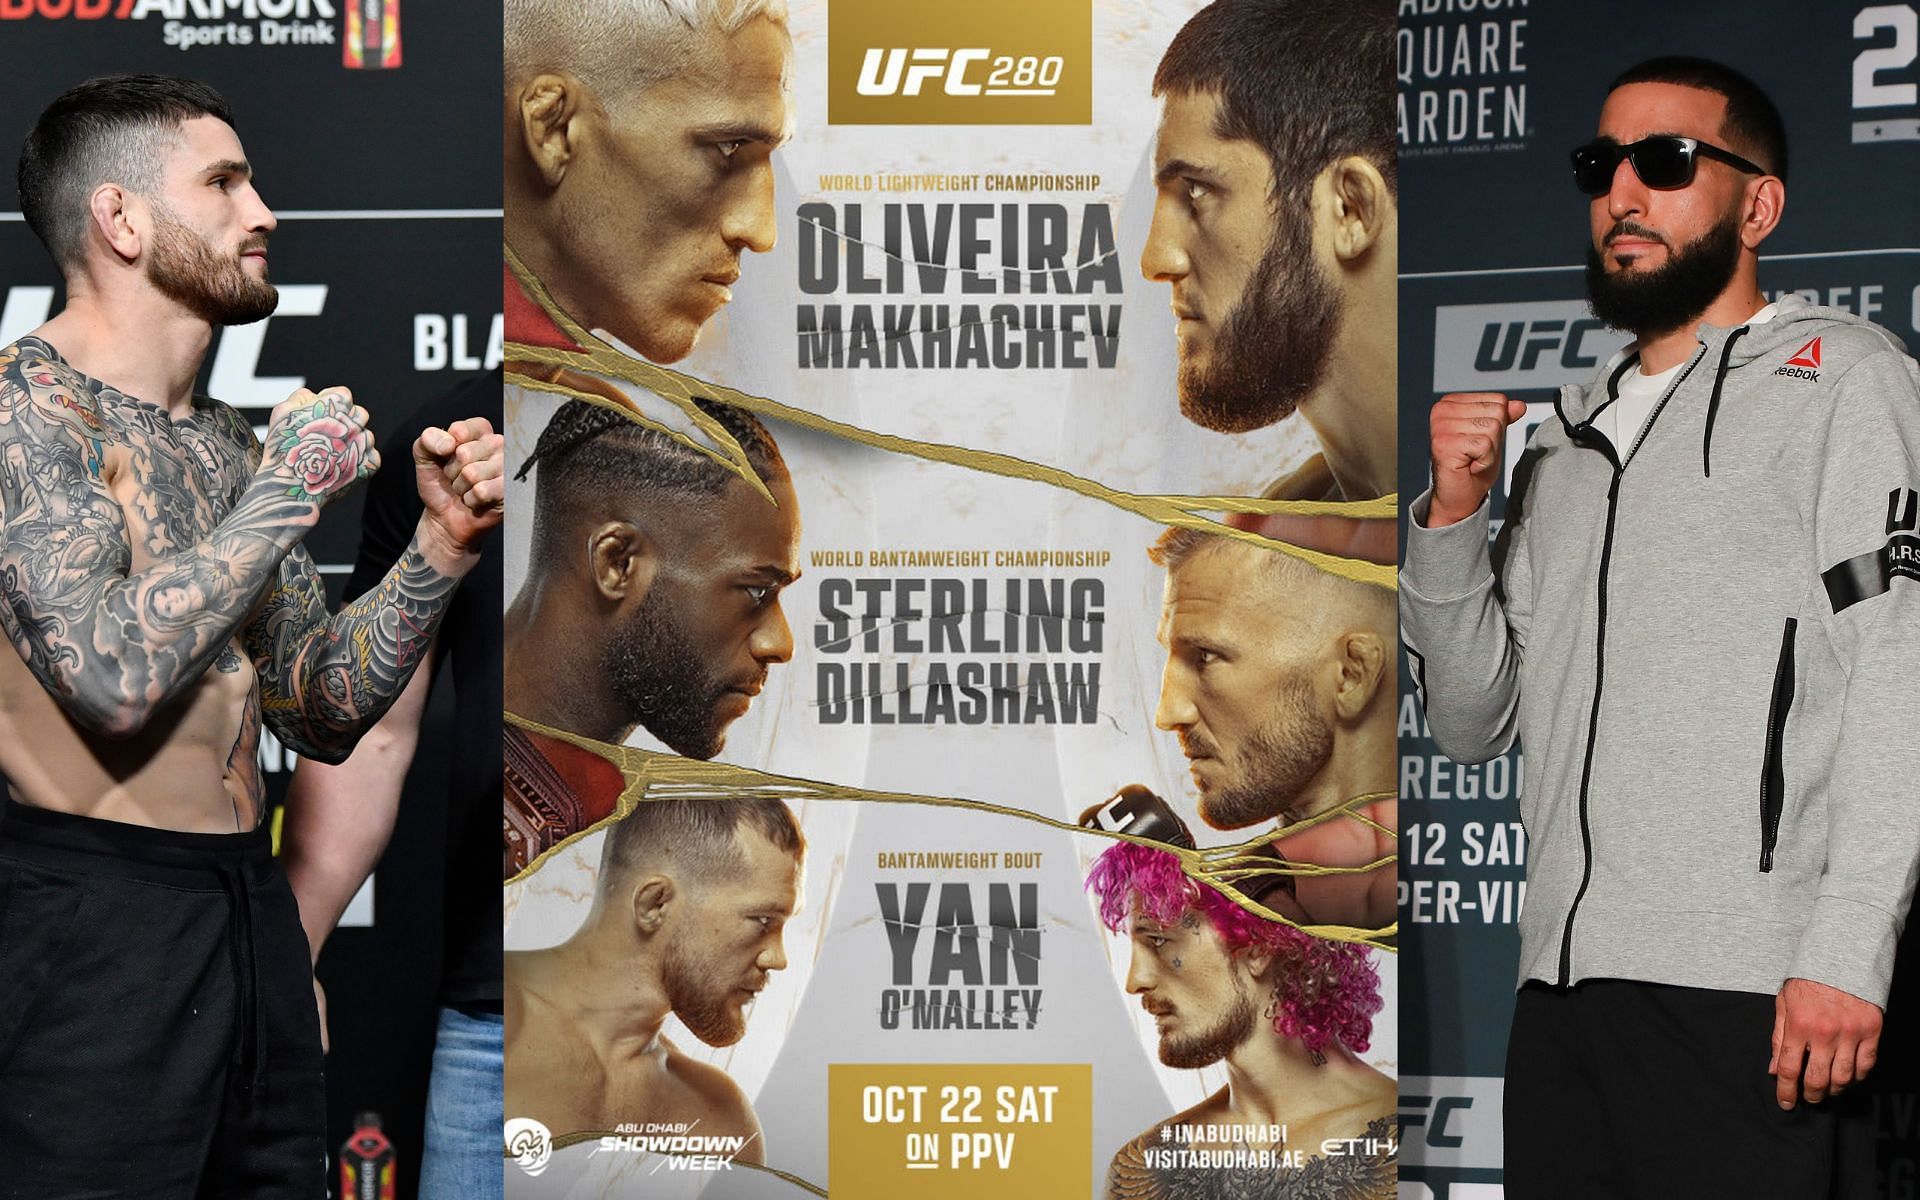 Sean Brady (left), UFC 280 official poster (center), Belal Muhammad (right). [Images courtesy: left and right images from Getty Images, center image from UFC]